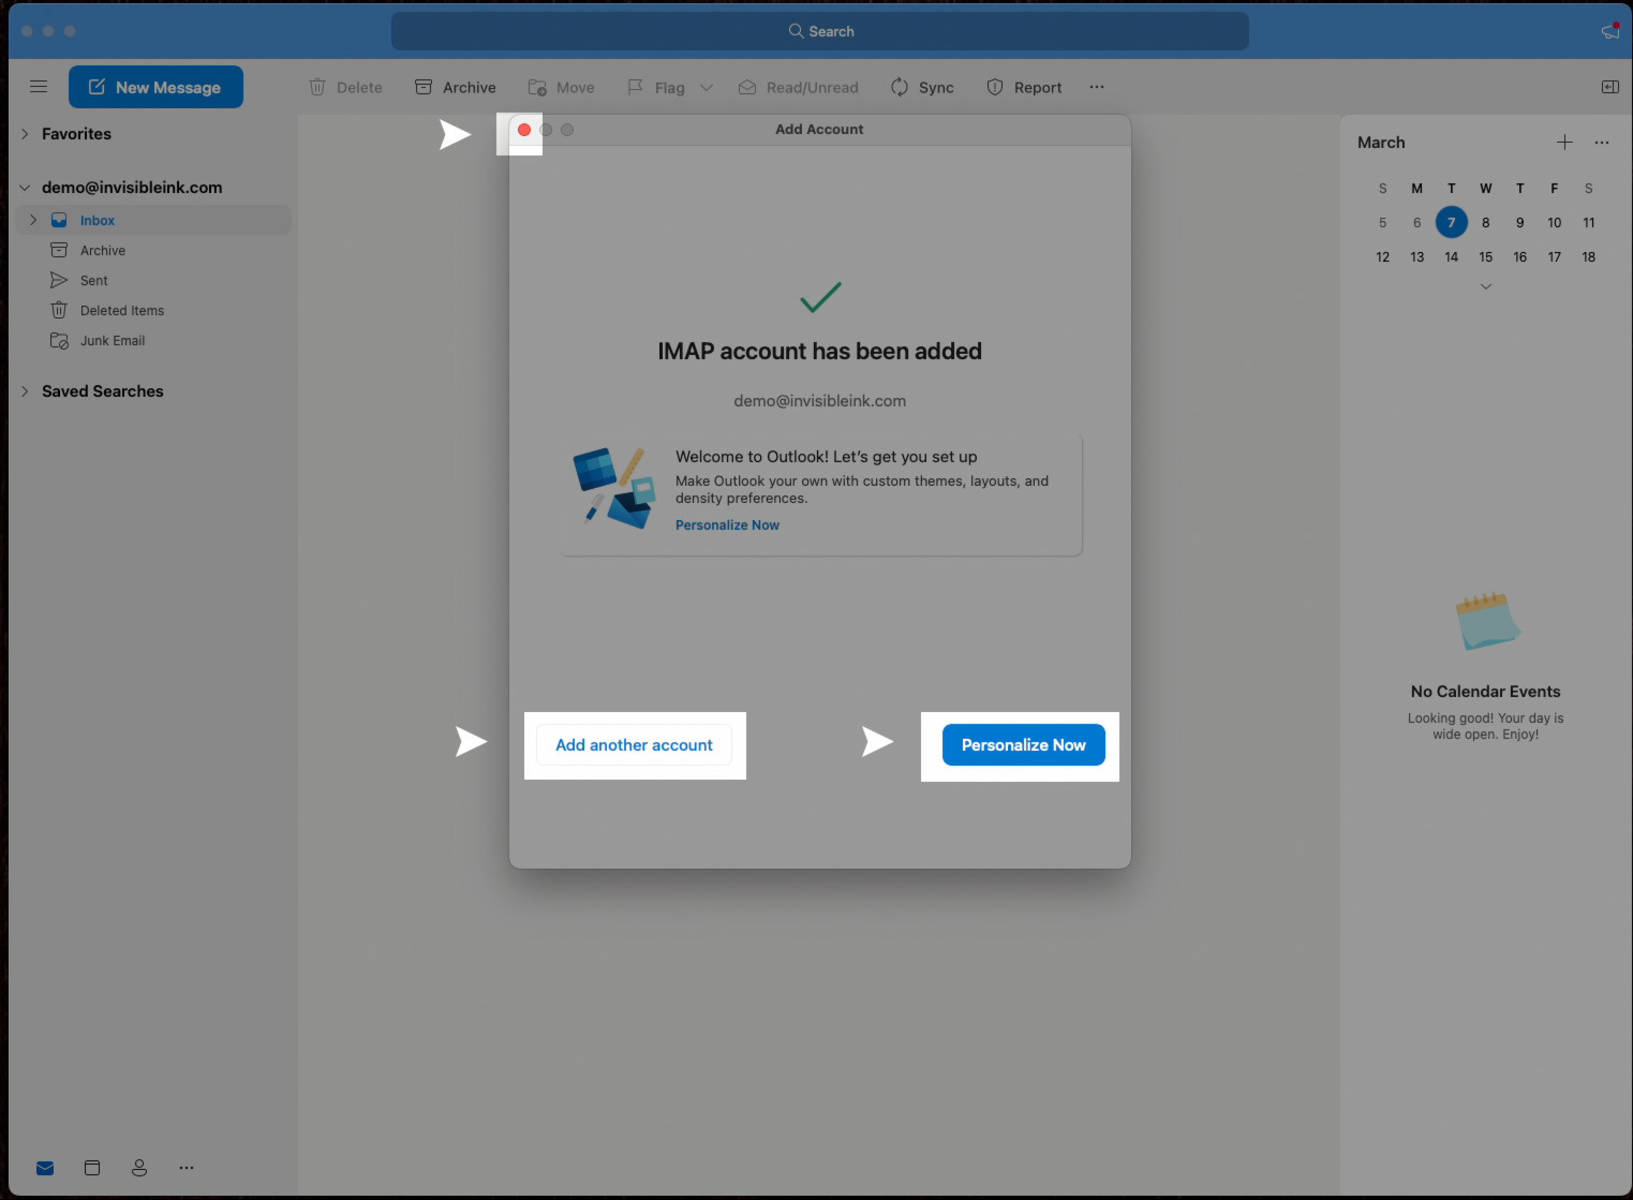 5) Click Add Another Account to add another mailbox, or select Personalize Now to customize the display of your new mailbox. You can also click the red circle to close the Add Account window and start using Outlook.